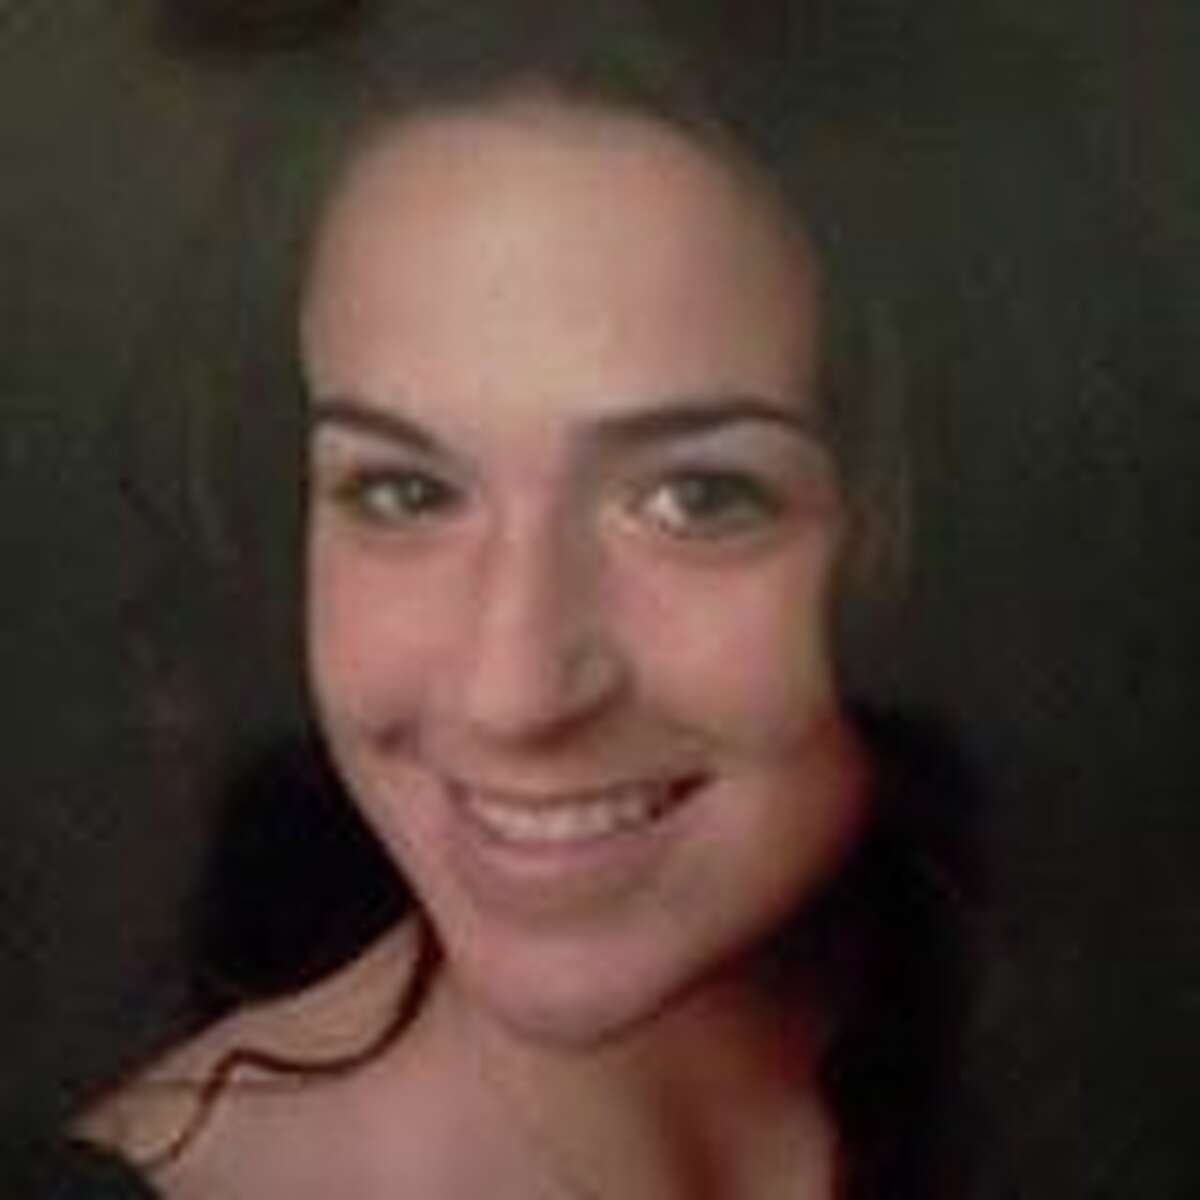 Meghan Beebe, 21, was killed in a hit-and-run incident in Byram in 2013. 